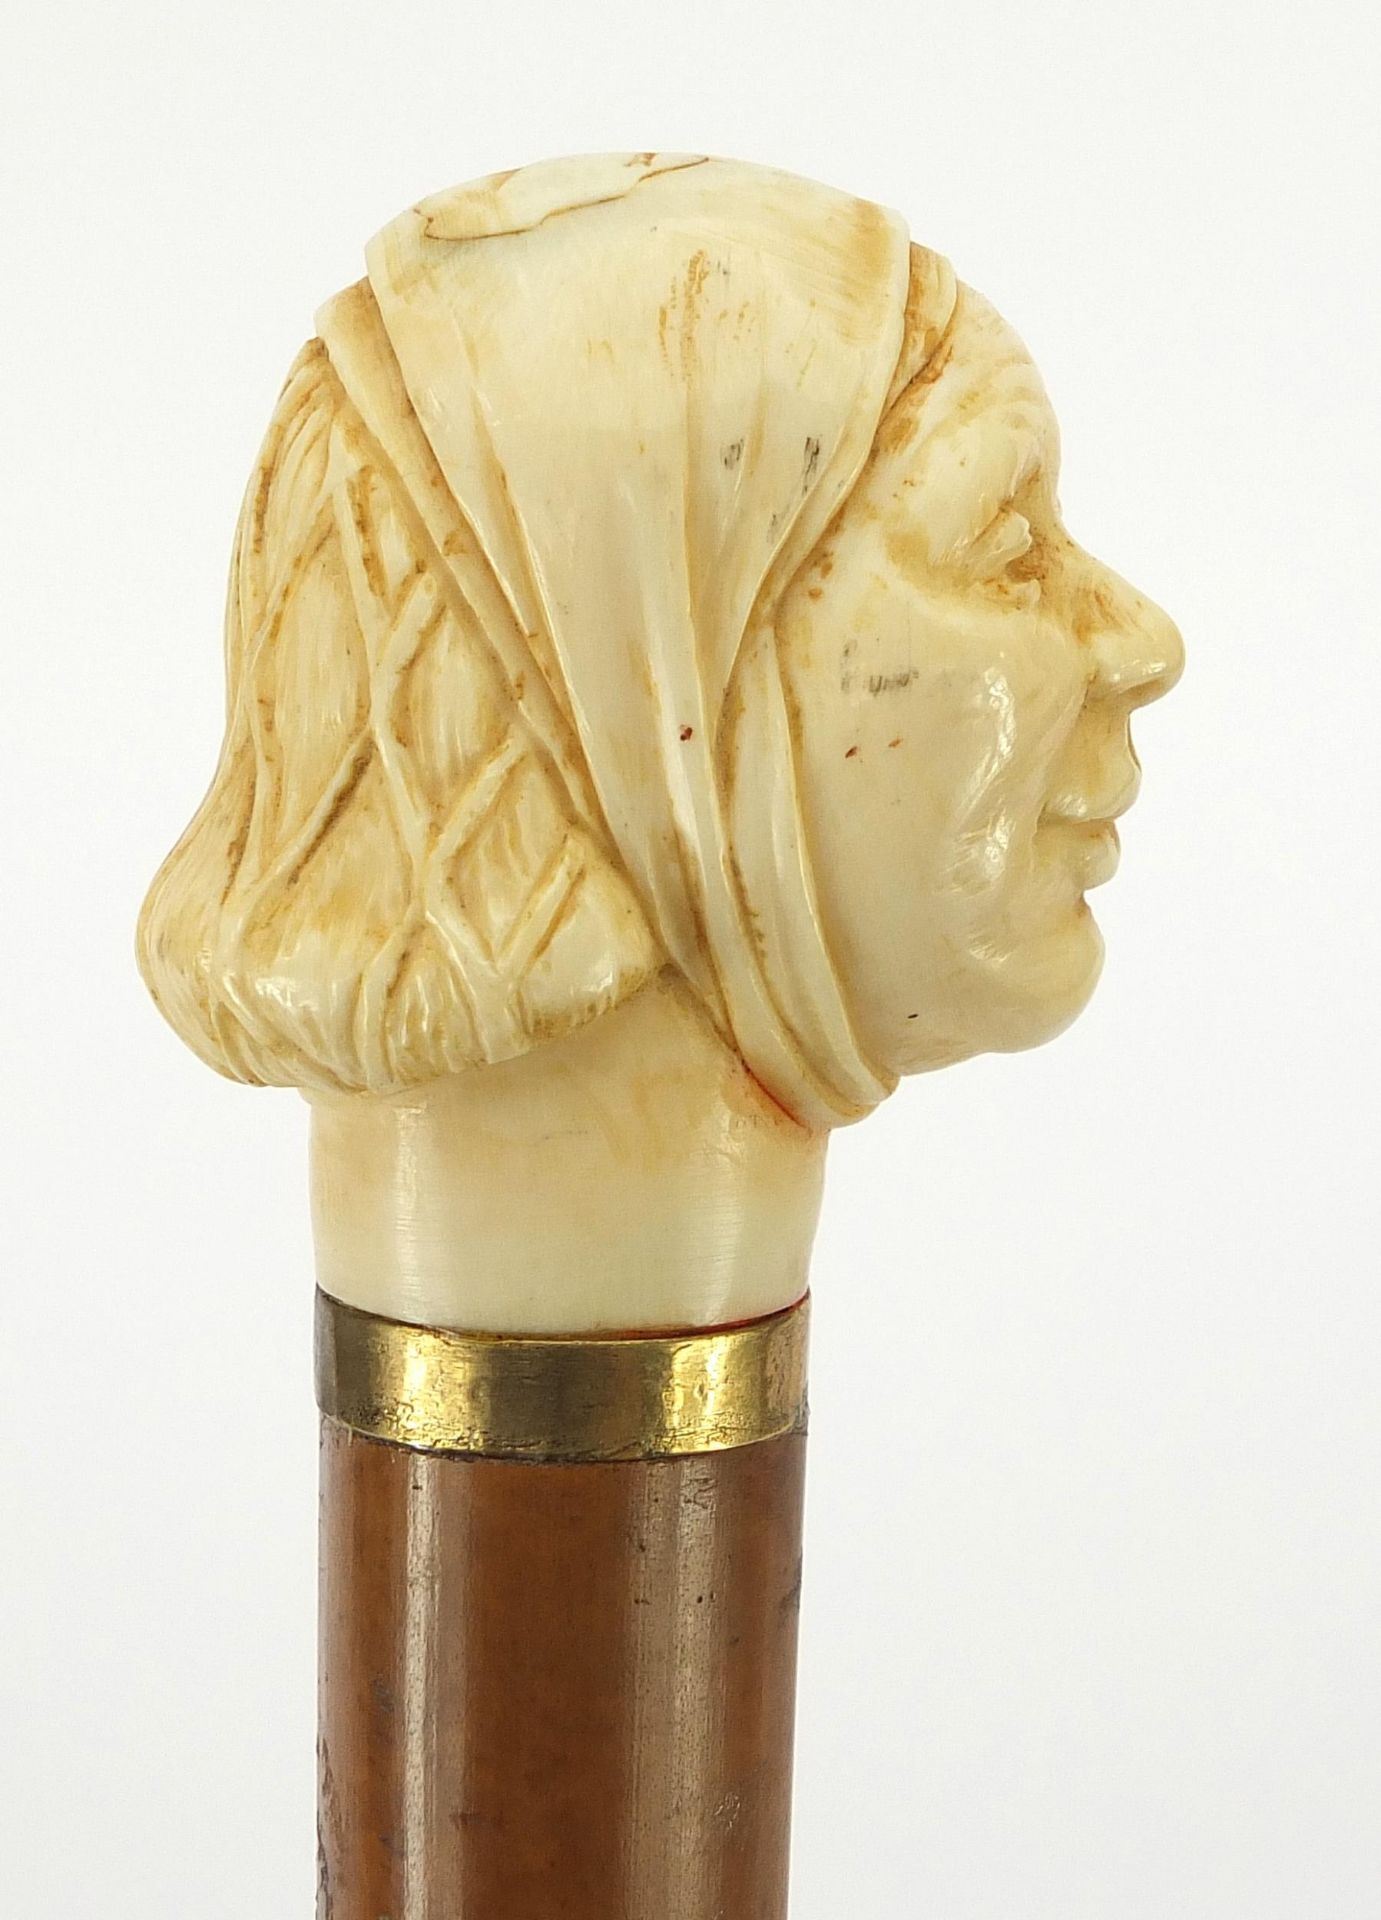 Hardwood and ebony walking stick with carved ivory pommel in the form of a lady's head, 90cm in - Image 2 of 8